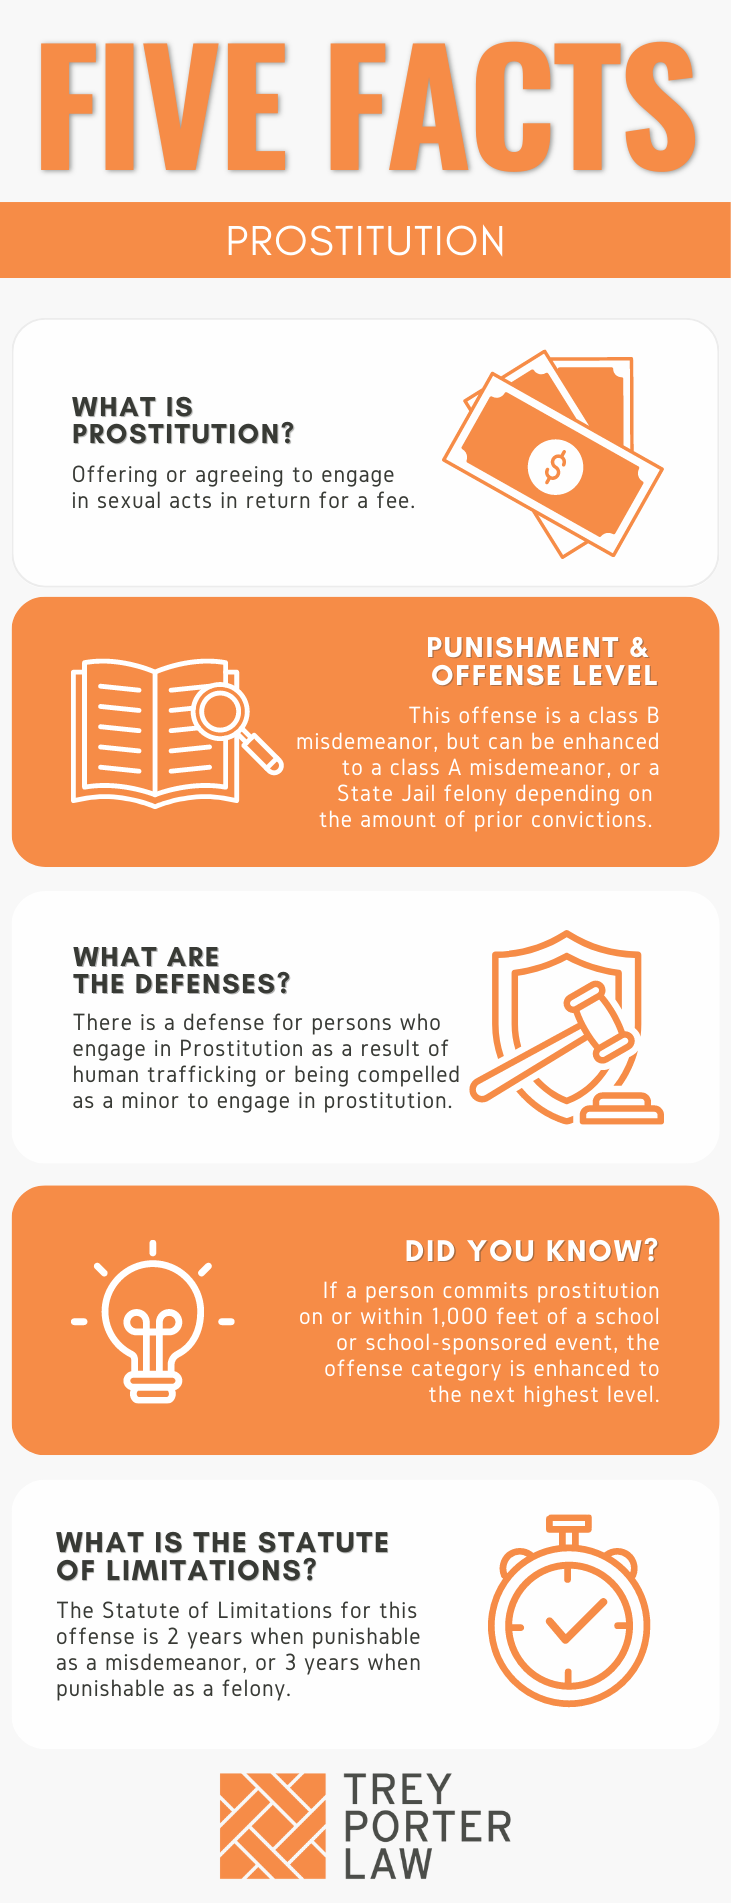 Texas Penal Code 43.02 - Prostitution